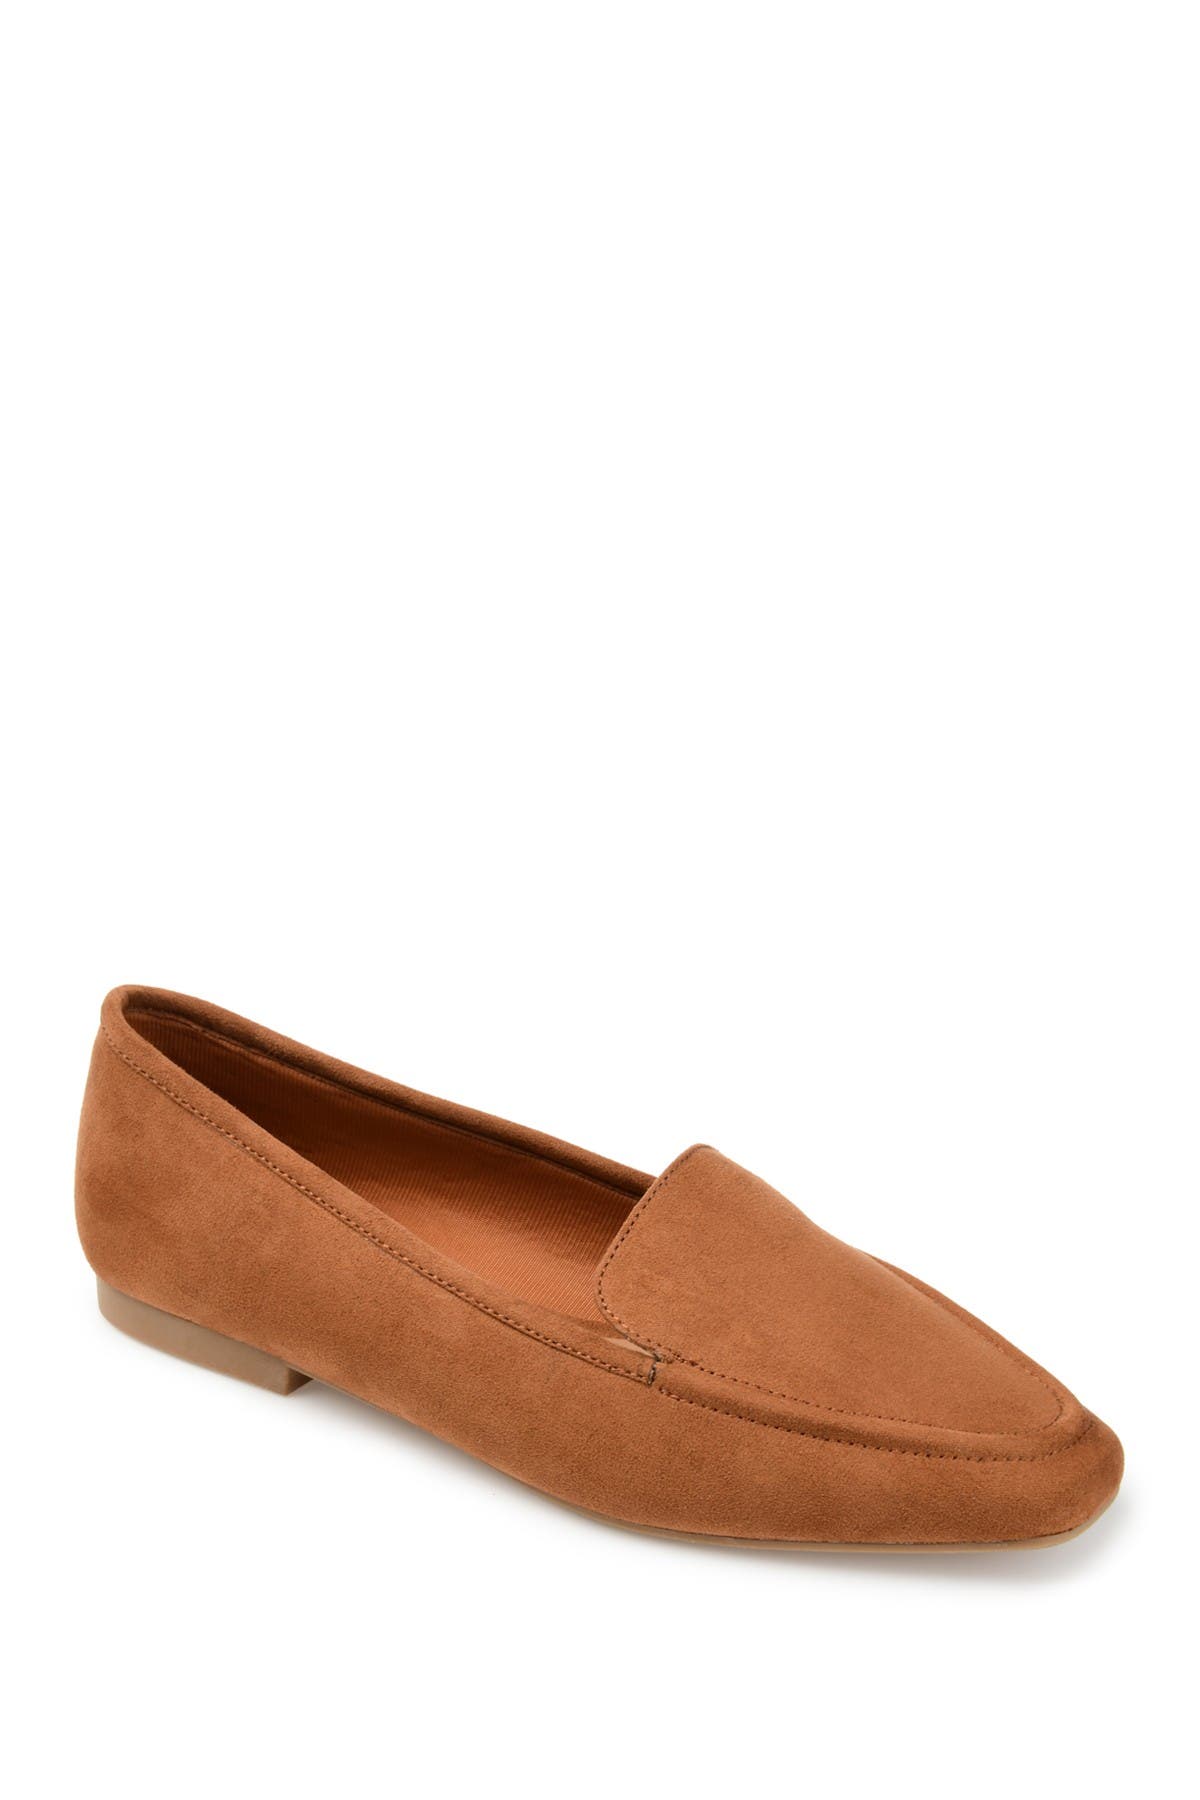 Journee Collection Tullie Loafer In Rust/copper1